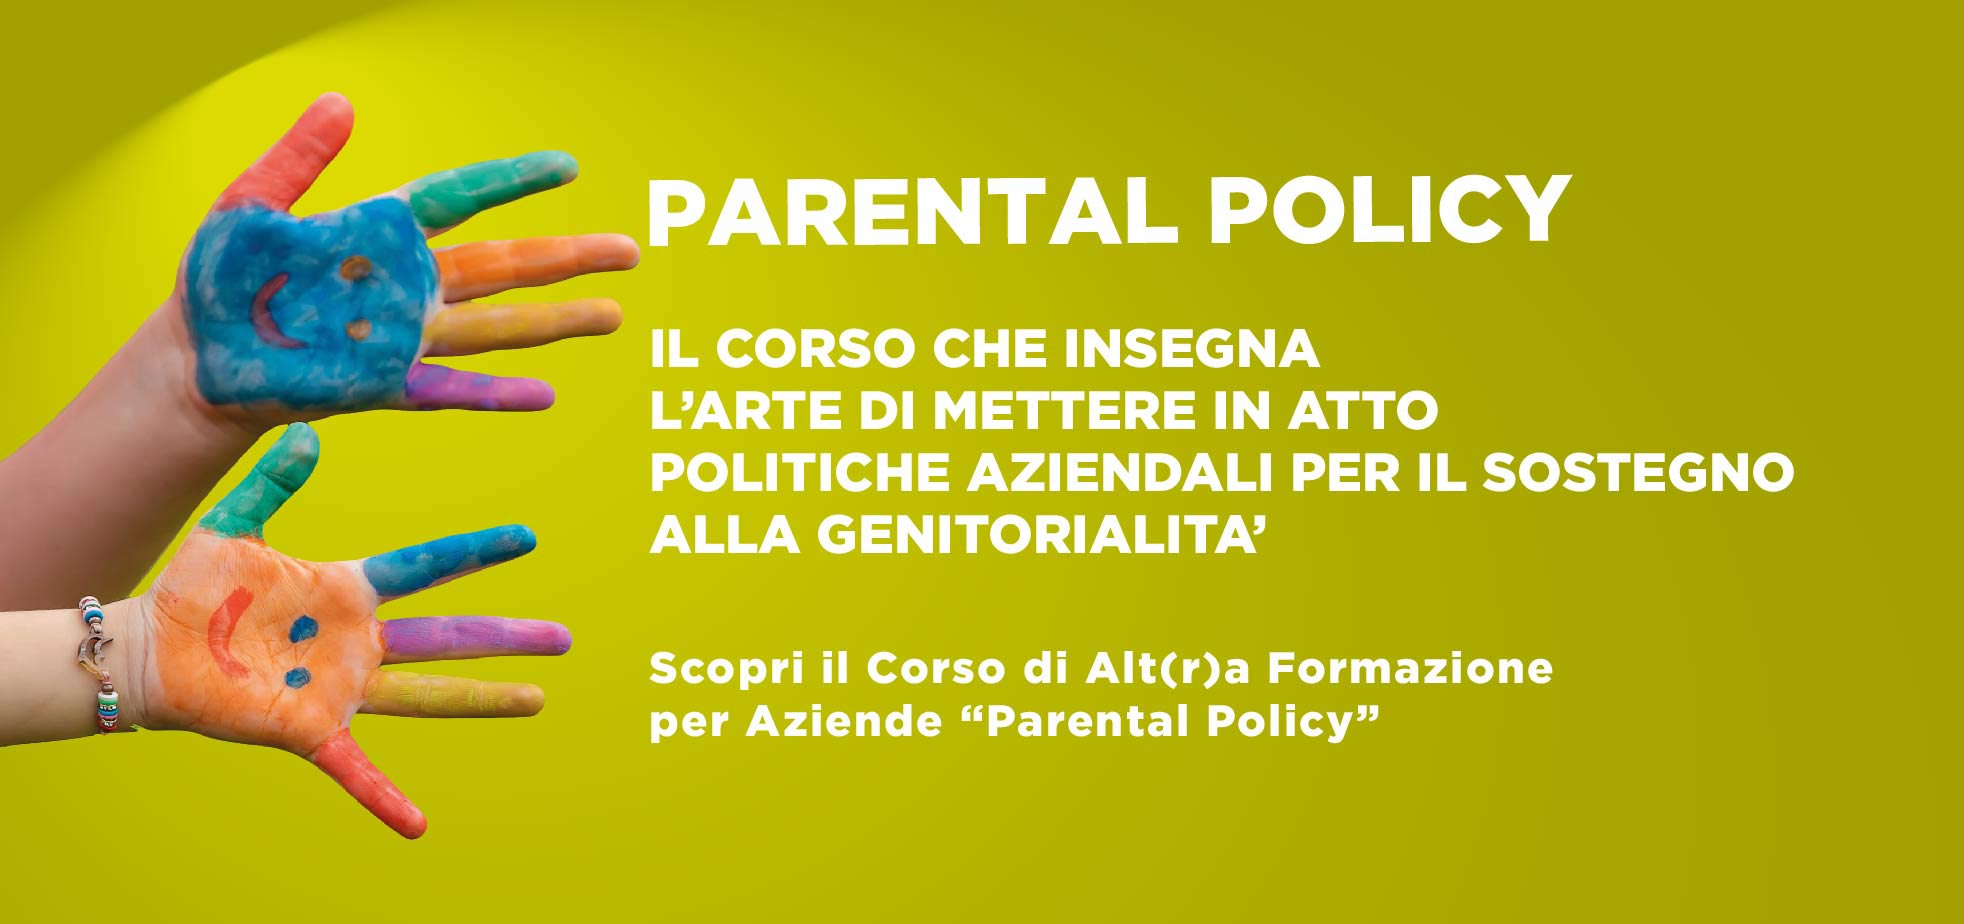 Parental Policy